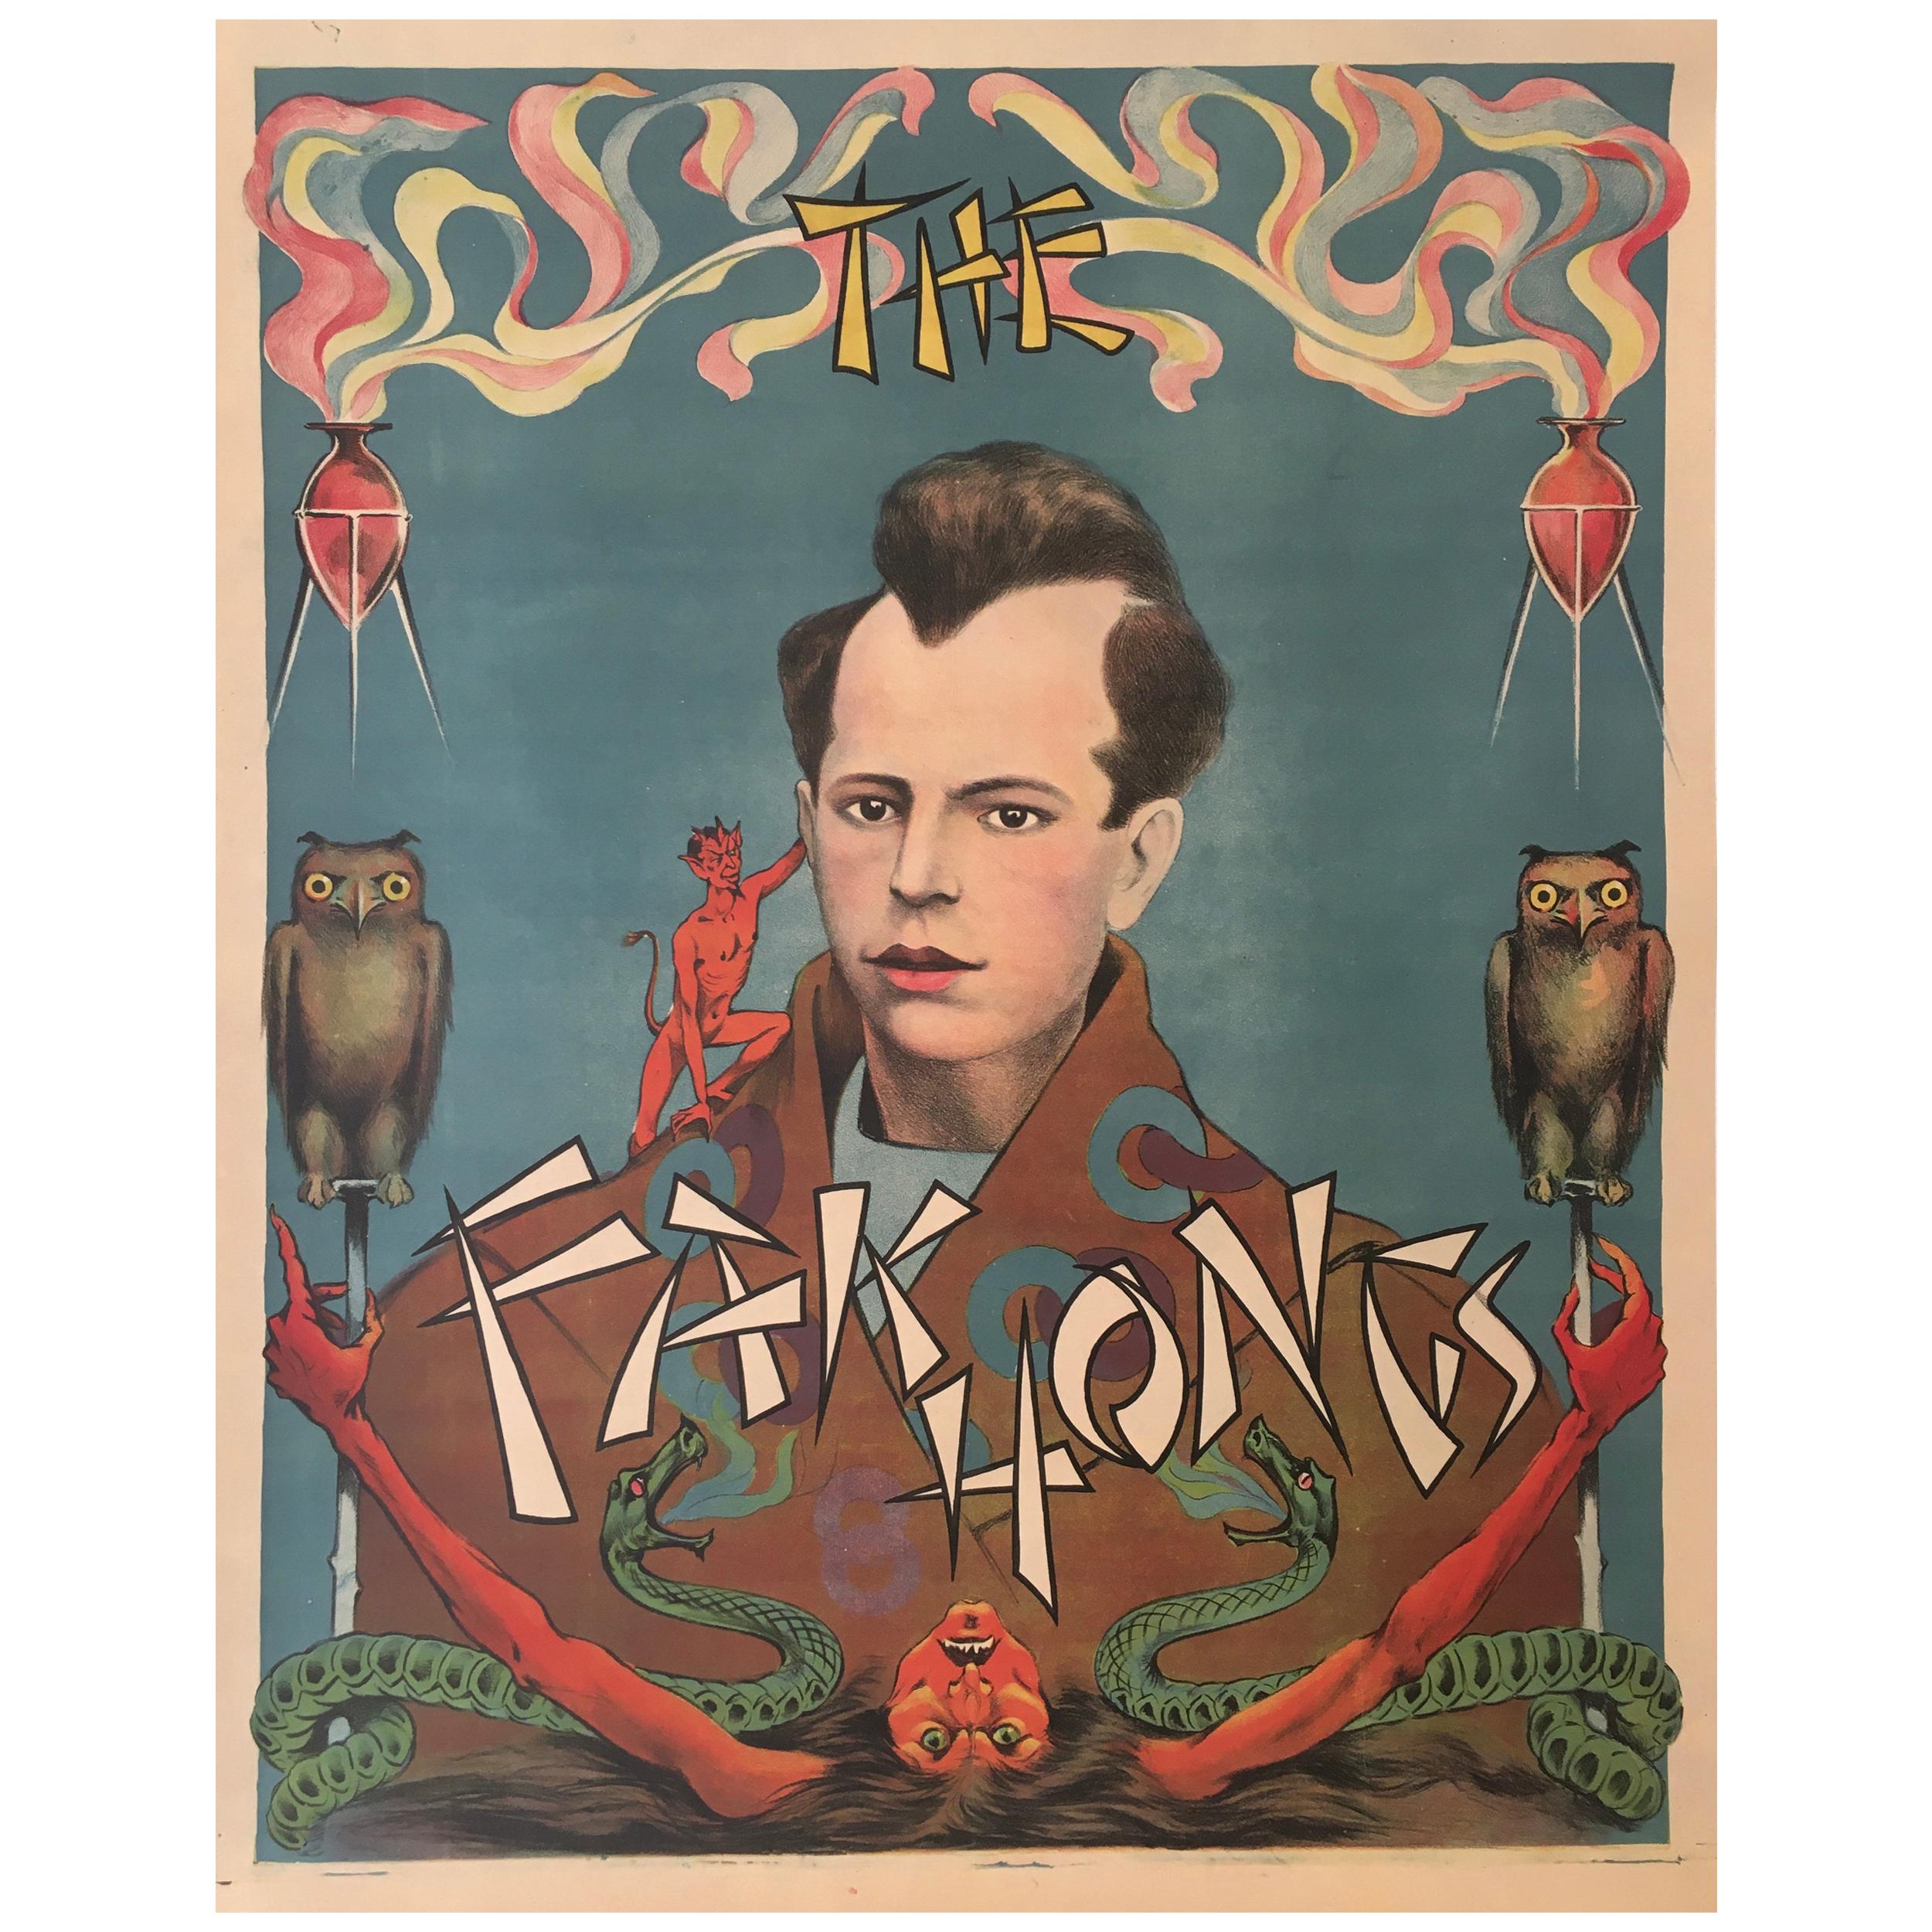 'The Fak Hong' Original Vintage French Theatre and Cabaret Poster, circa 1920